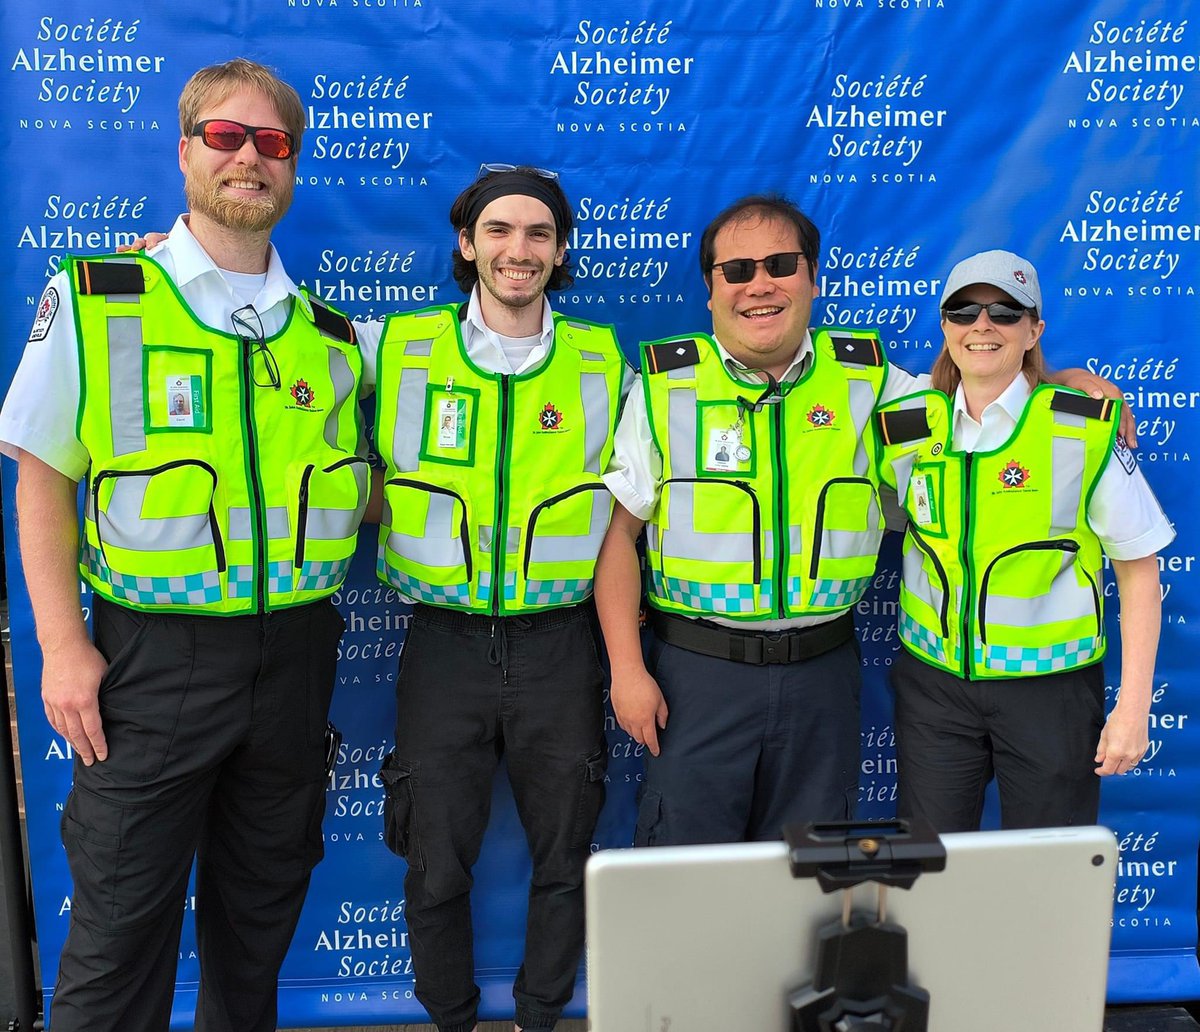 I am volunteering with the St John Ambulance team today for the Alzheimer Society IG Wealth Management Walk for Alzheimer's! #Alzheimer #CommunityService #Volunteers #FirstAid